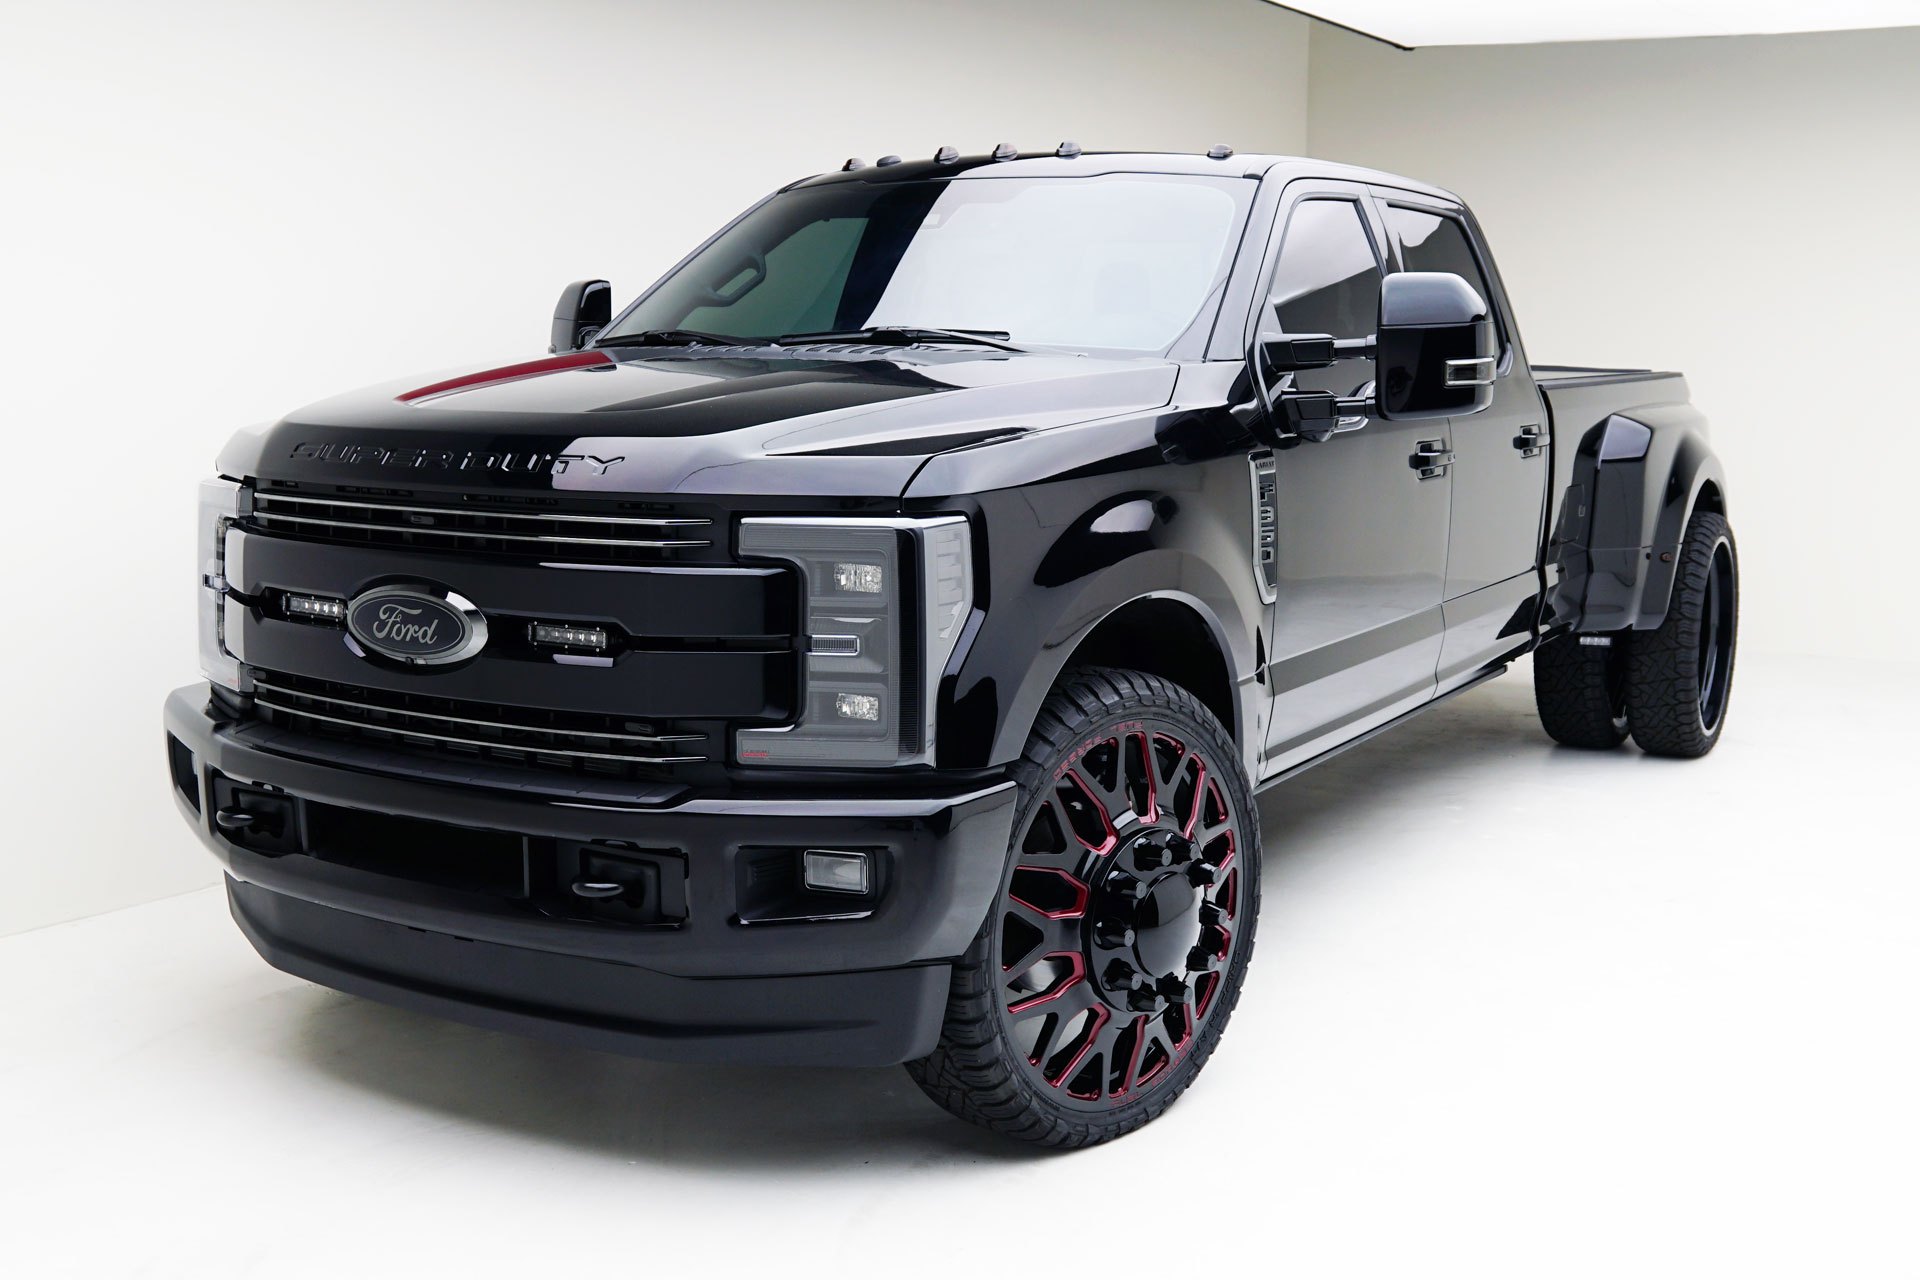 Black Ford F350 With Black Grille And Custom Painted Rims - Photo by MAD Industries